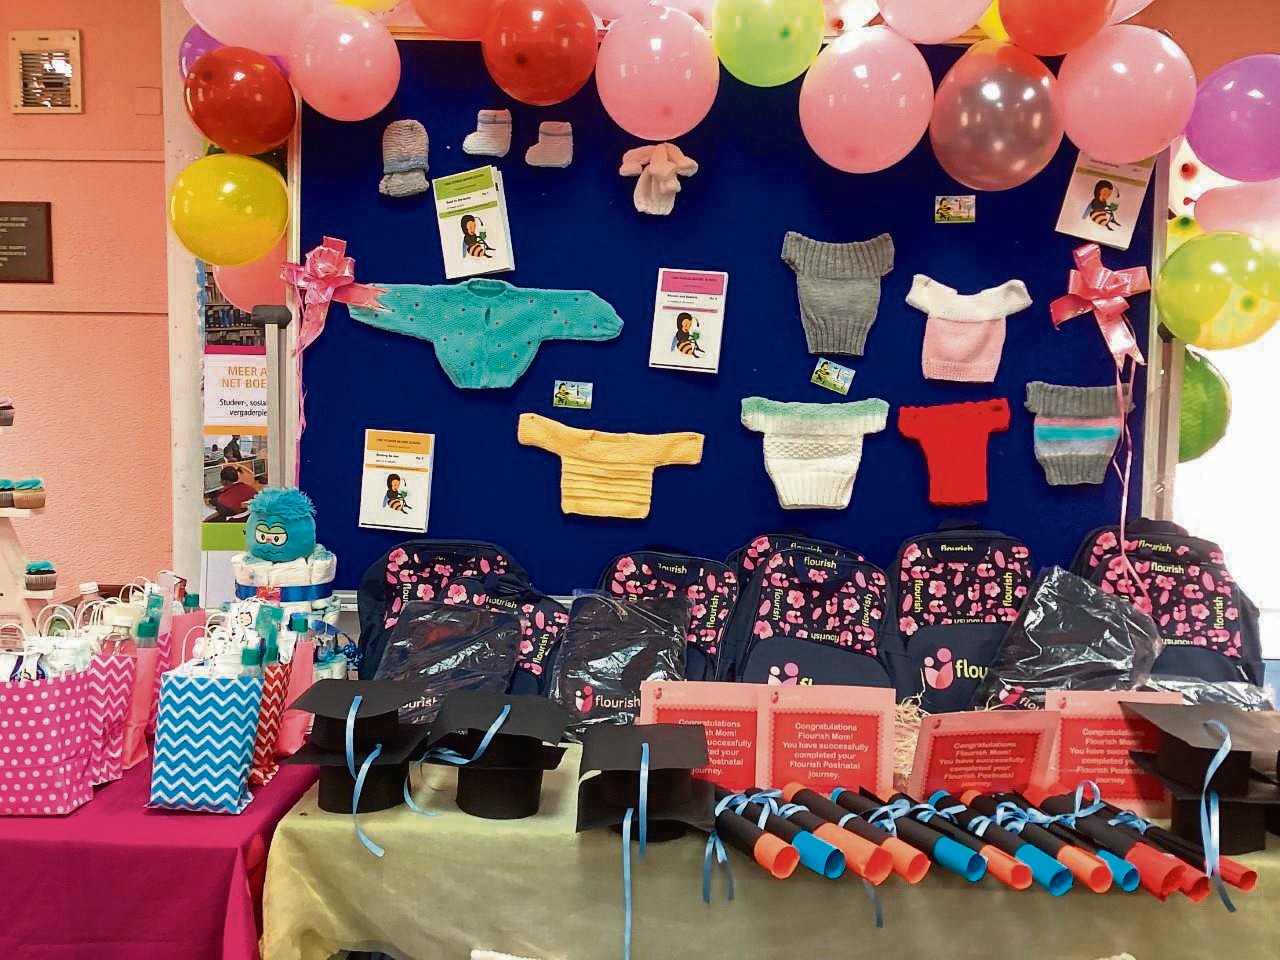 An exhibition of baby goods and a goodie-bag on display from one of the three previous baby showers and workshops/graduations held at Hanover Park the past year.